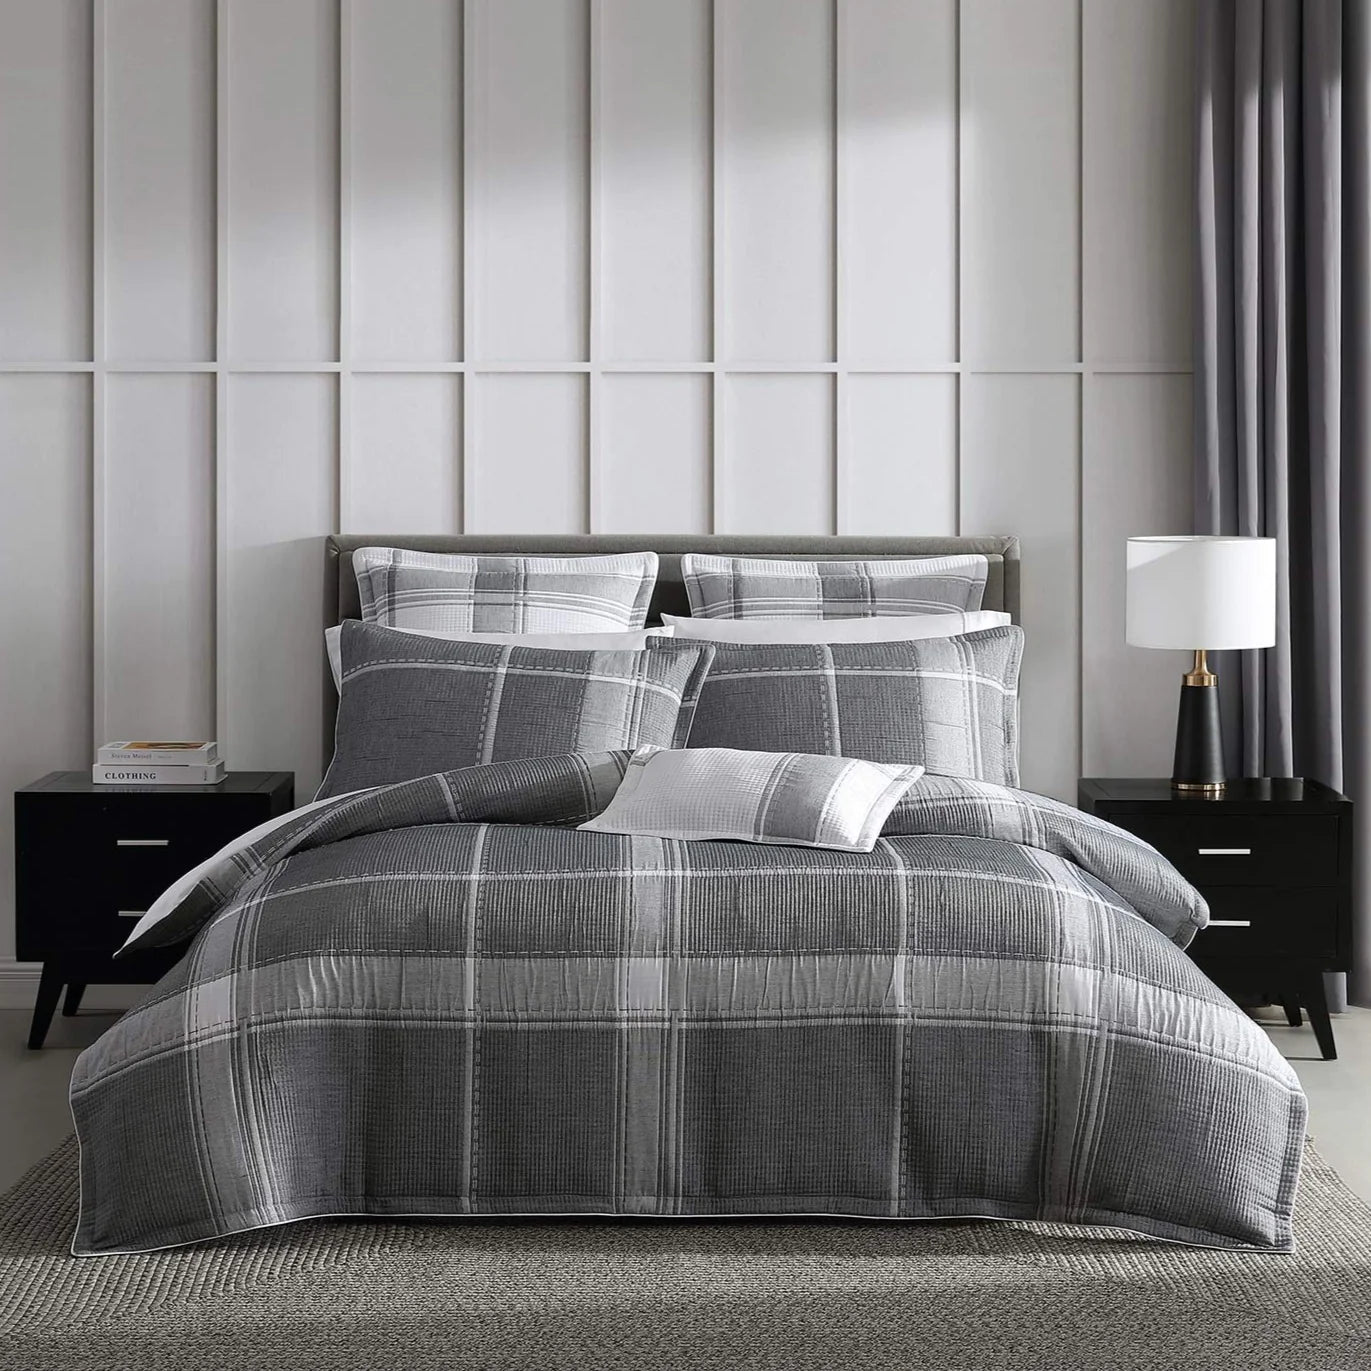 Cannon Charcoal is the perfect compromise between patterns and plains. This dextrous design features an all-over check pattern of such subtlety, it emanates the chic sophistication of a neutral palette. The soft matelasse cover is finished with self-flanged edges, piped in white.